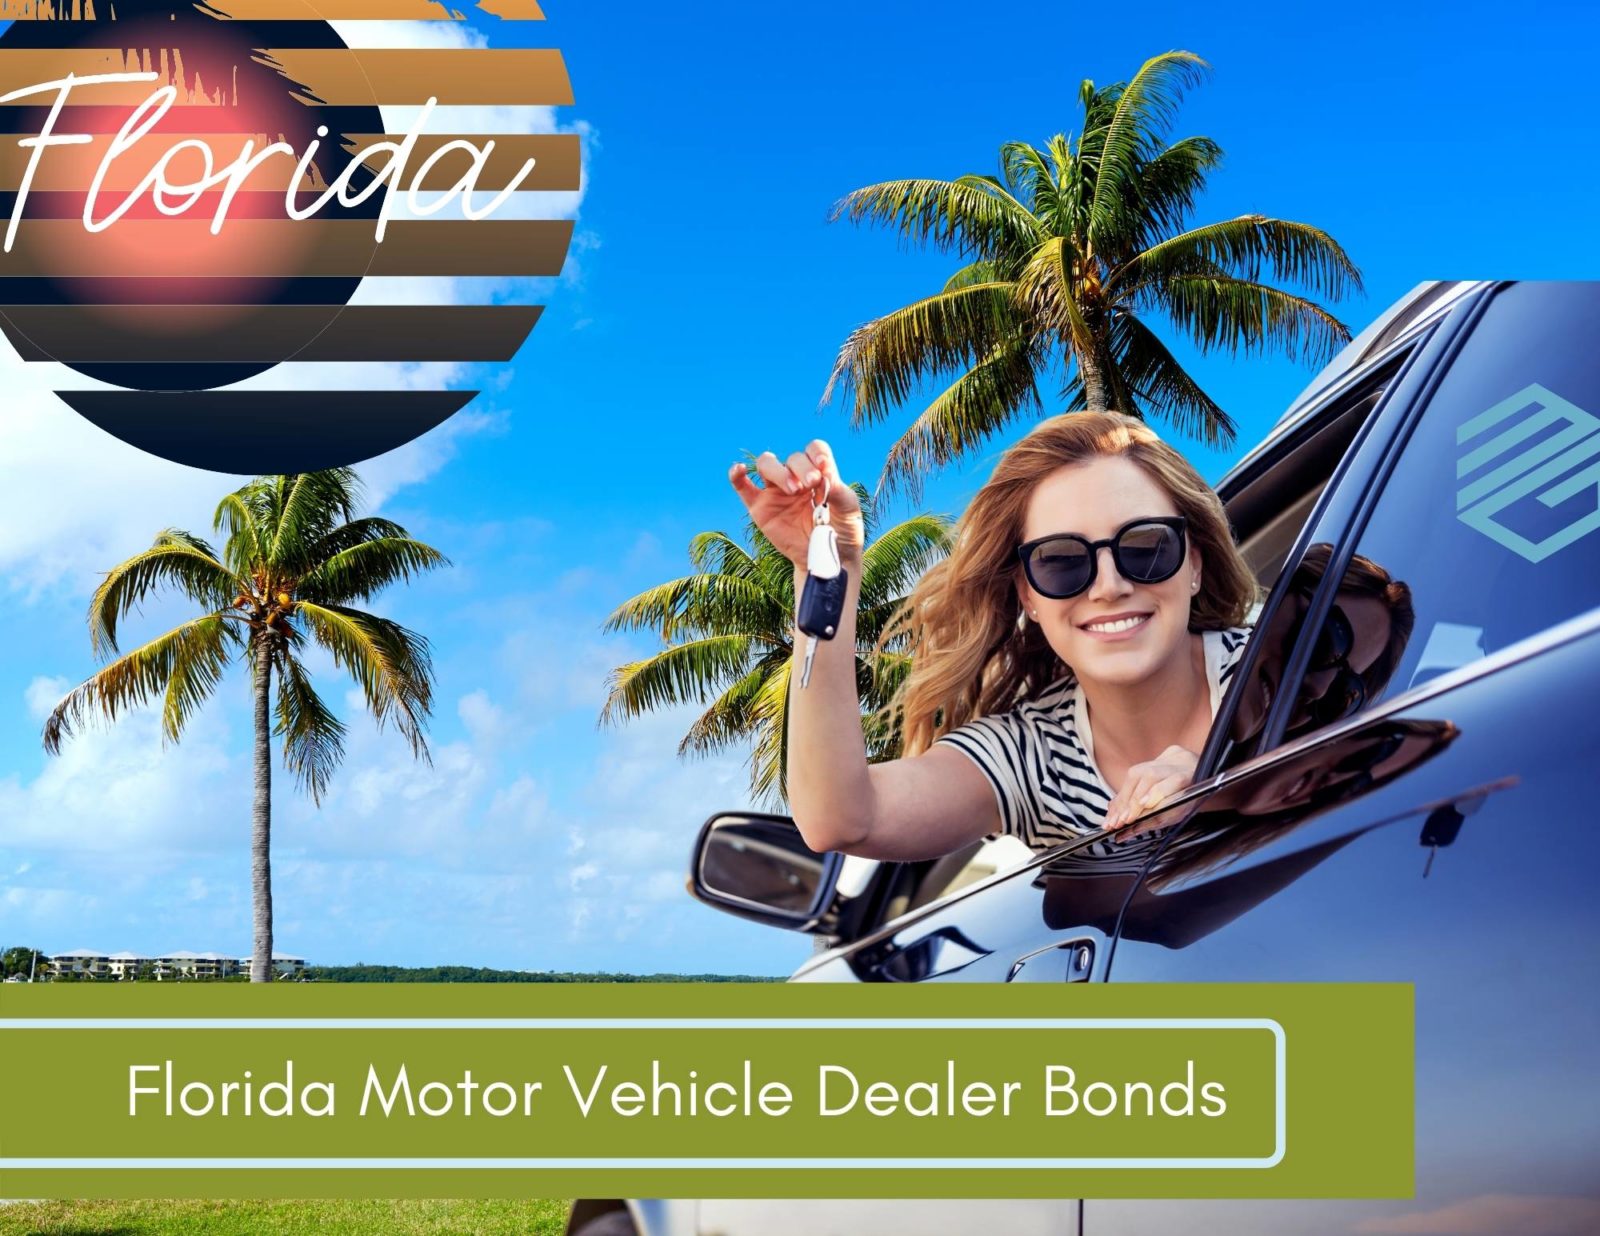 Florida Motor Vehicle Dealer Bonds - Shows a women holding the keys to her new vehicle out of the window while on a Florida beach. A green text box says, "Florida Motor Vehicle Dealer Bonds".